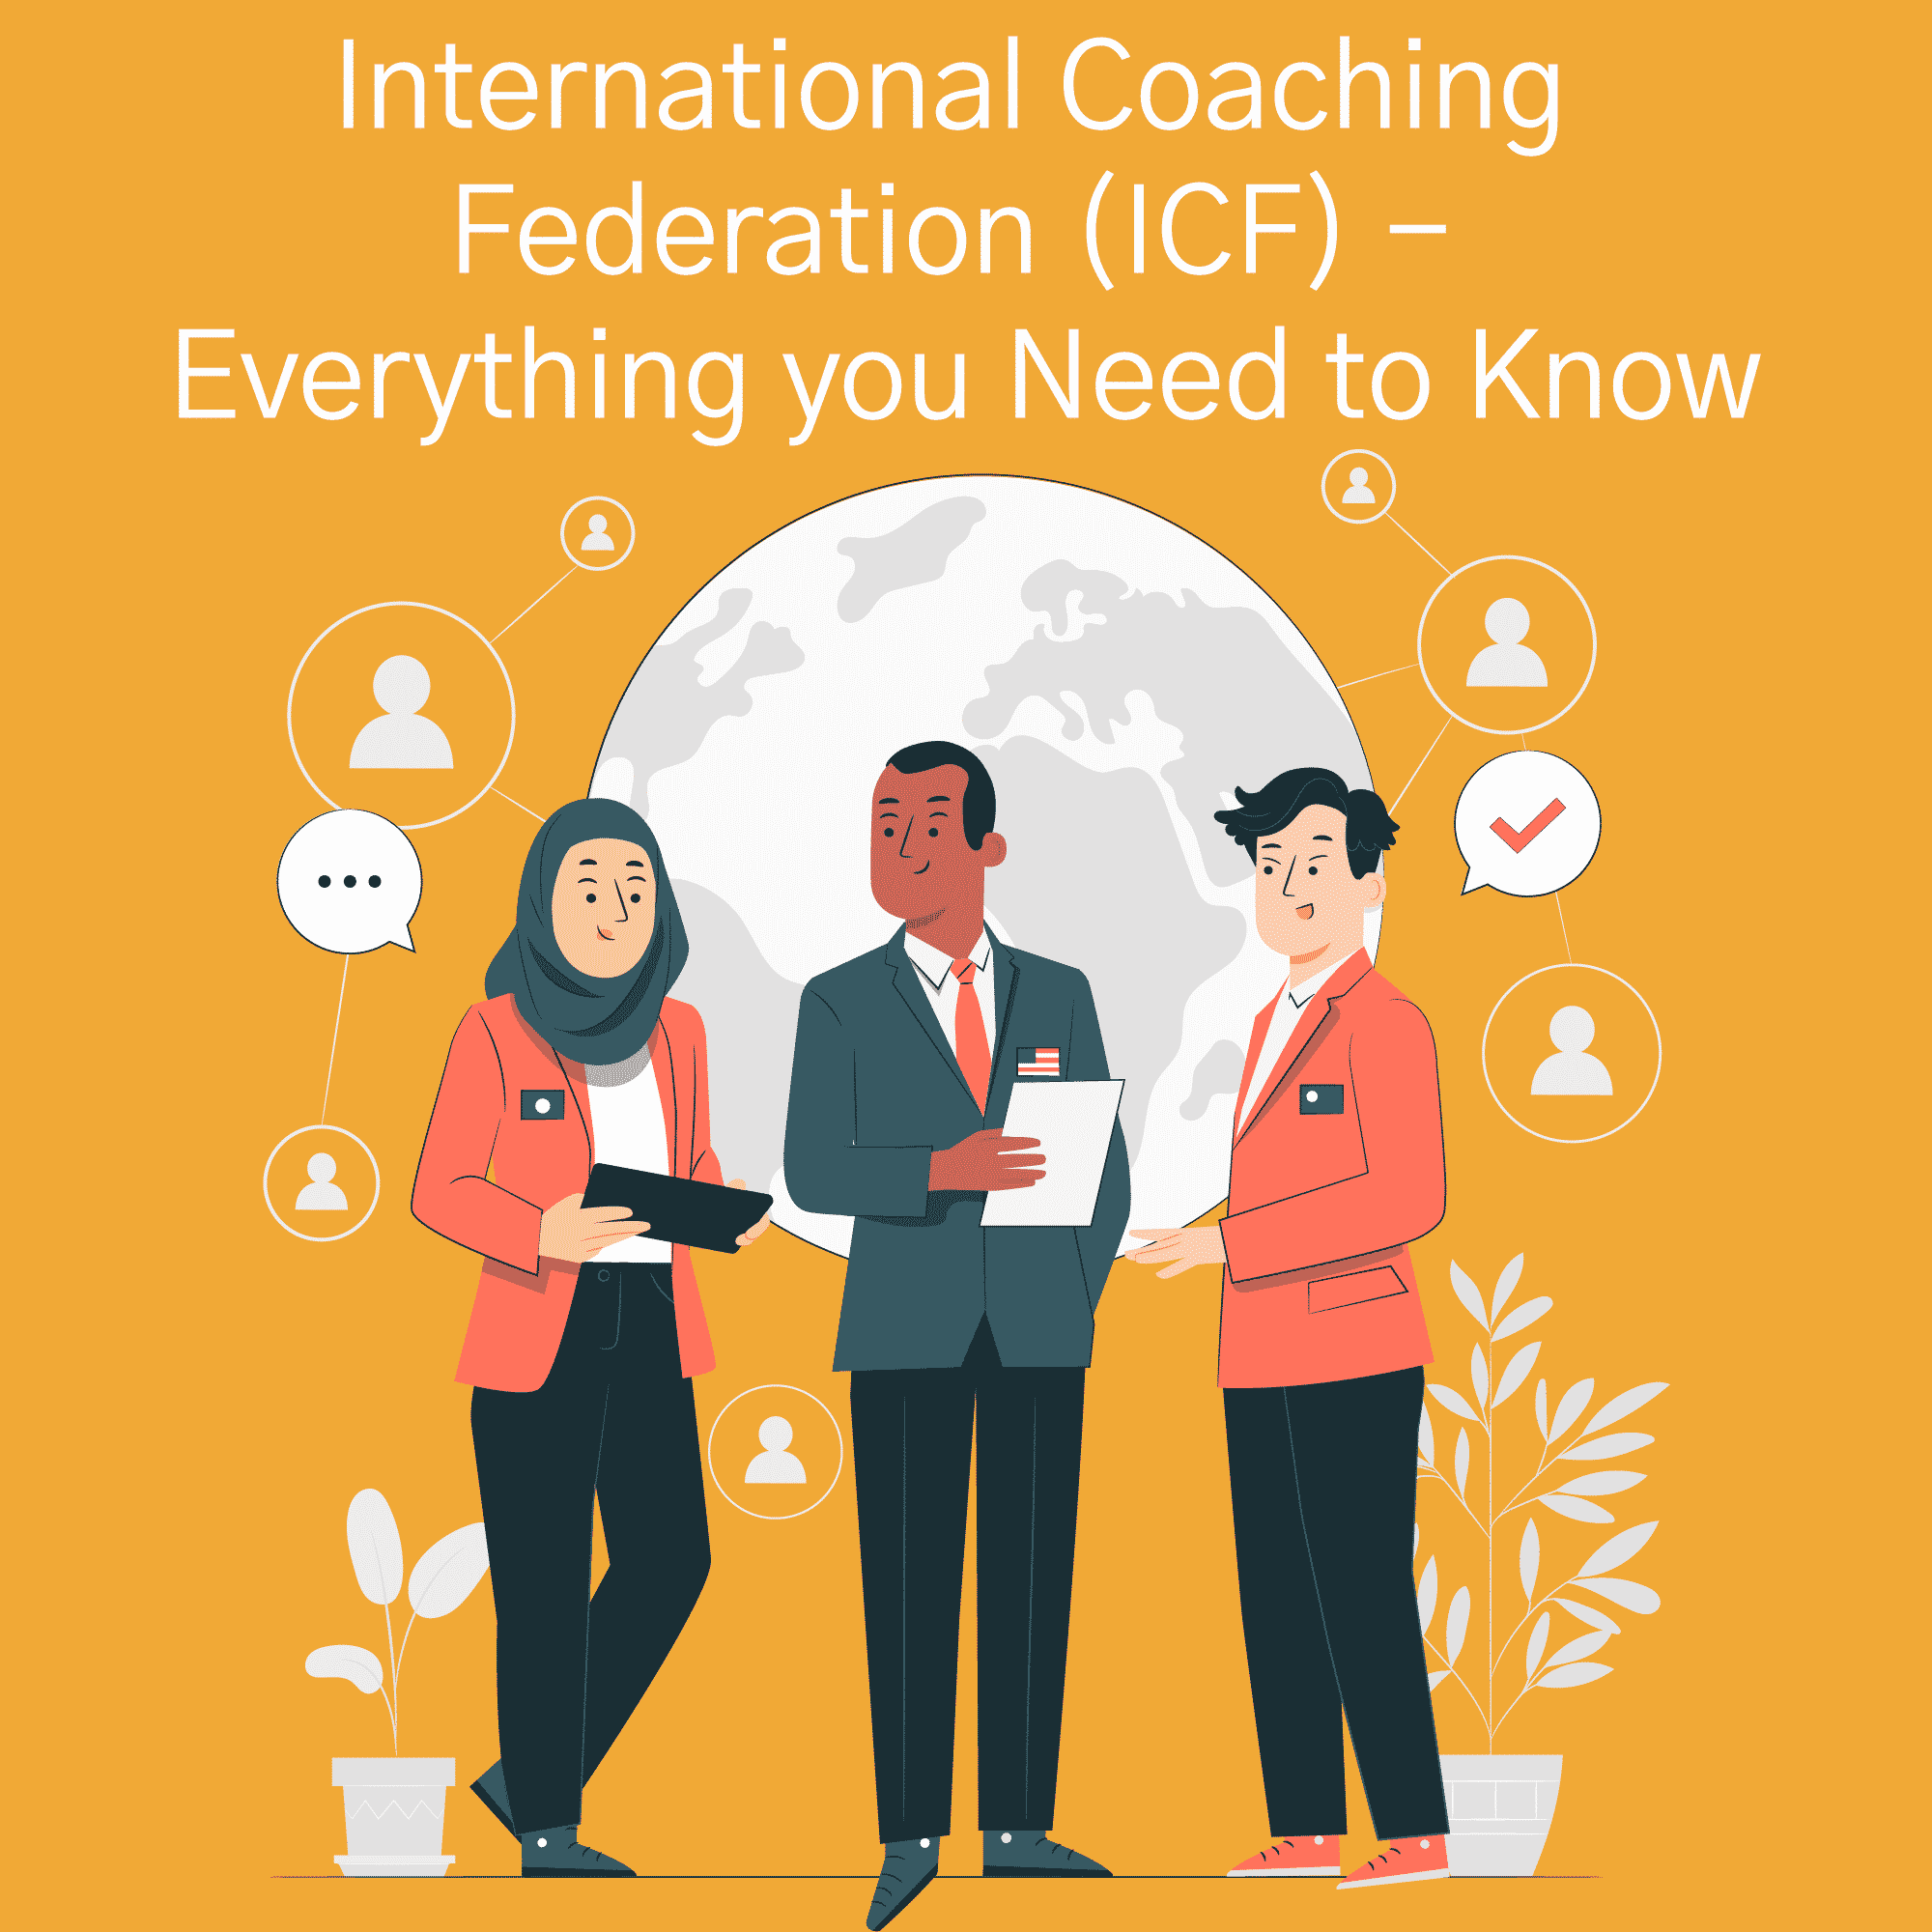 International Coaching Federation (ICF) – Everything you Need to Know